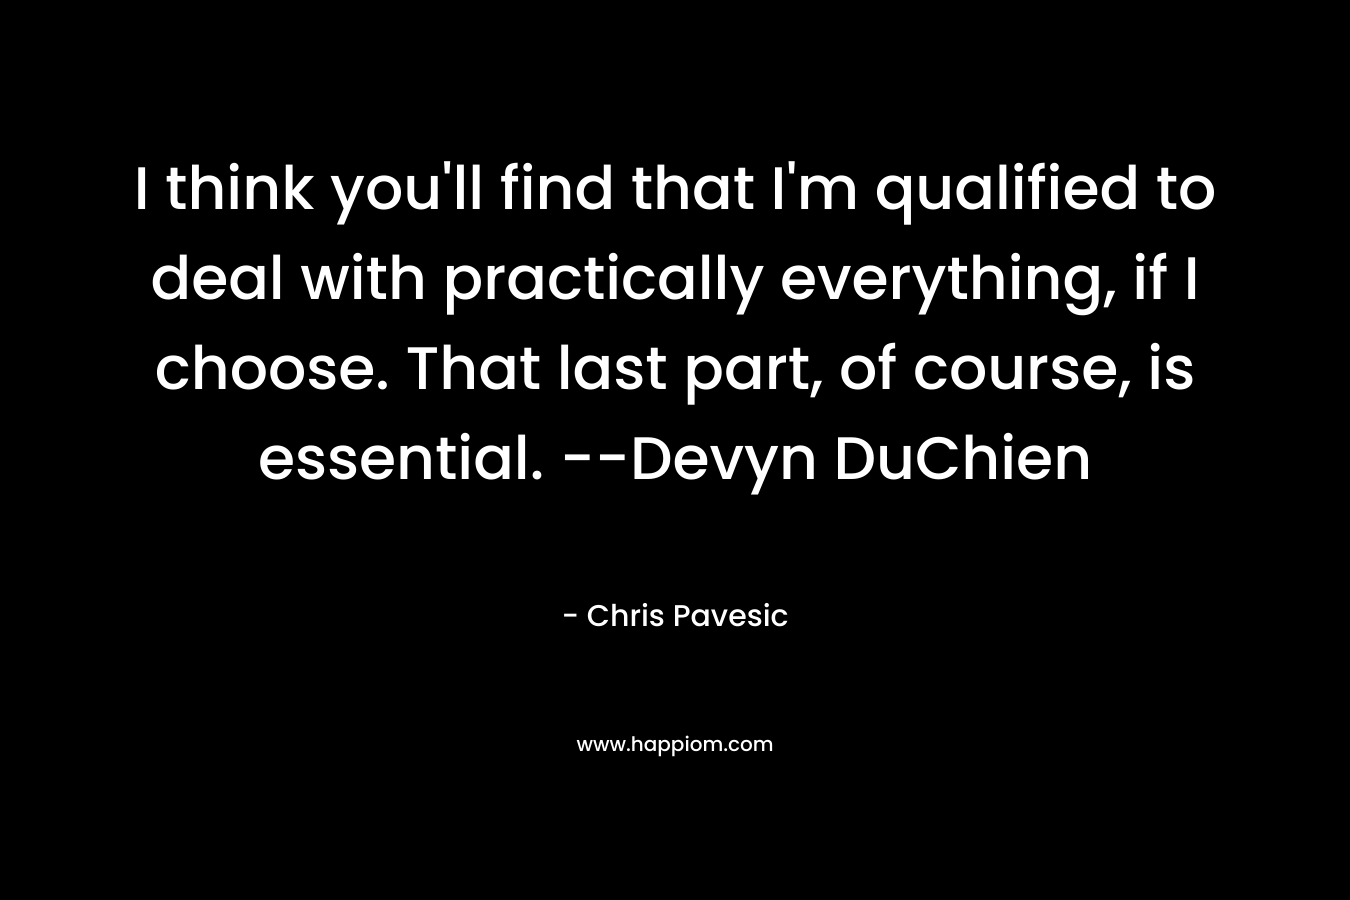 I think you'll find that I'm qualified to deal with practically everything, if I choose. That last part, of course, is essential. --Devyn DuChien